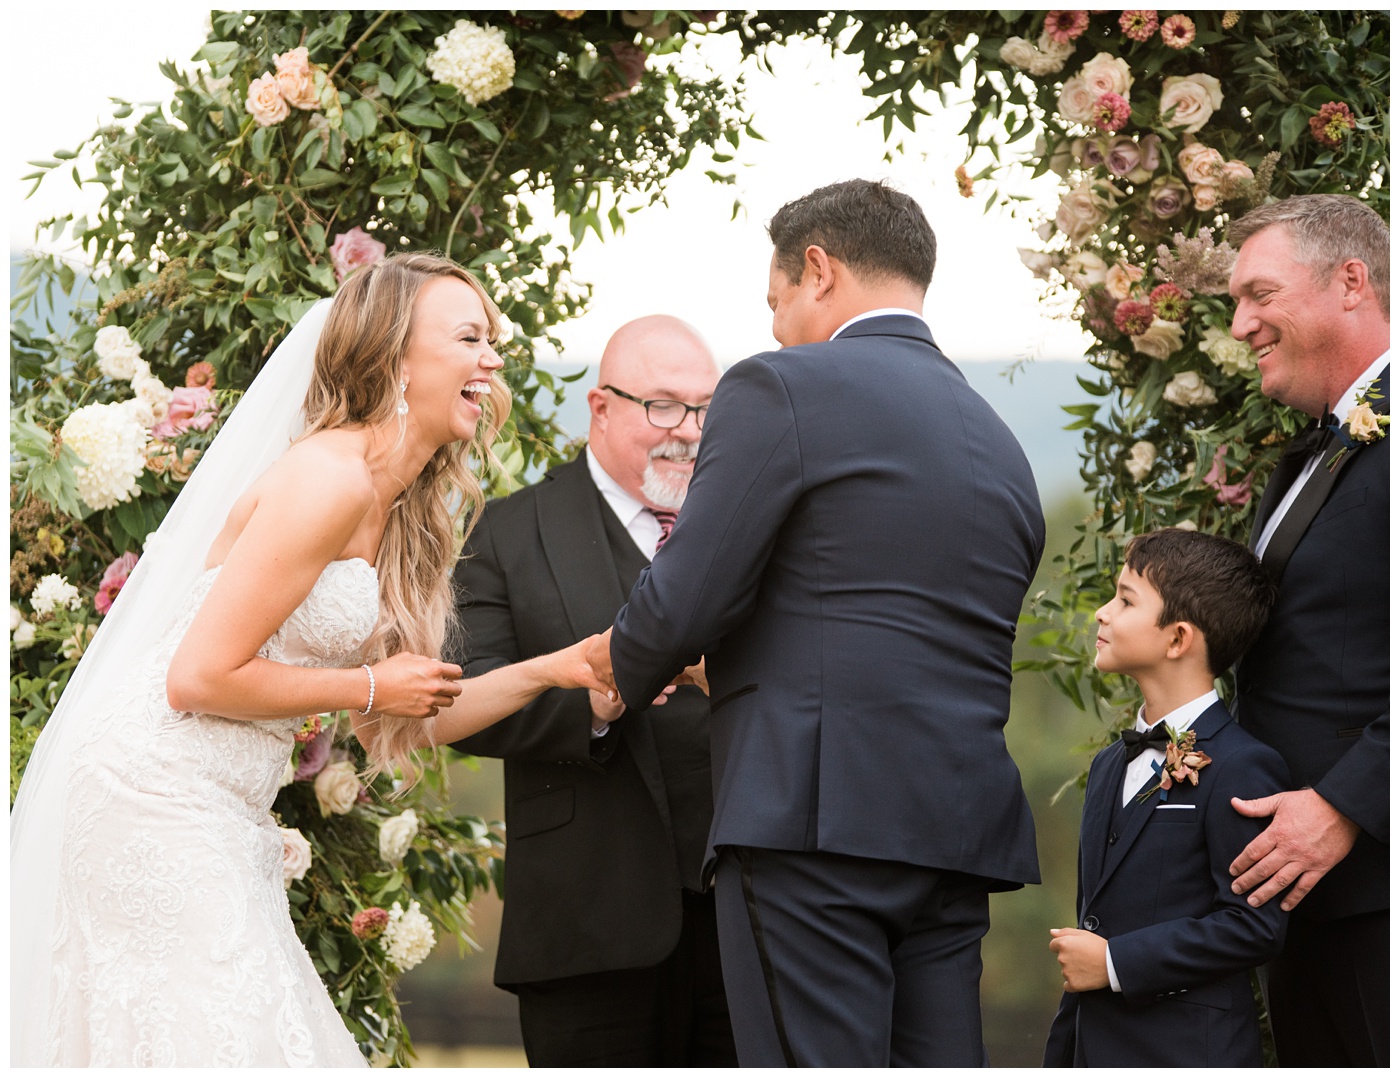 Bride and groom ceremony at King Family Vineyard in Charlottesville VA 